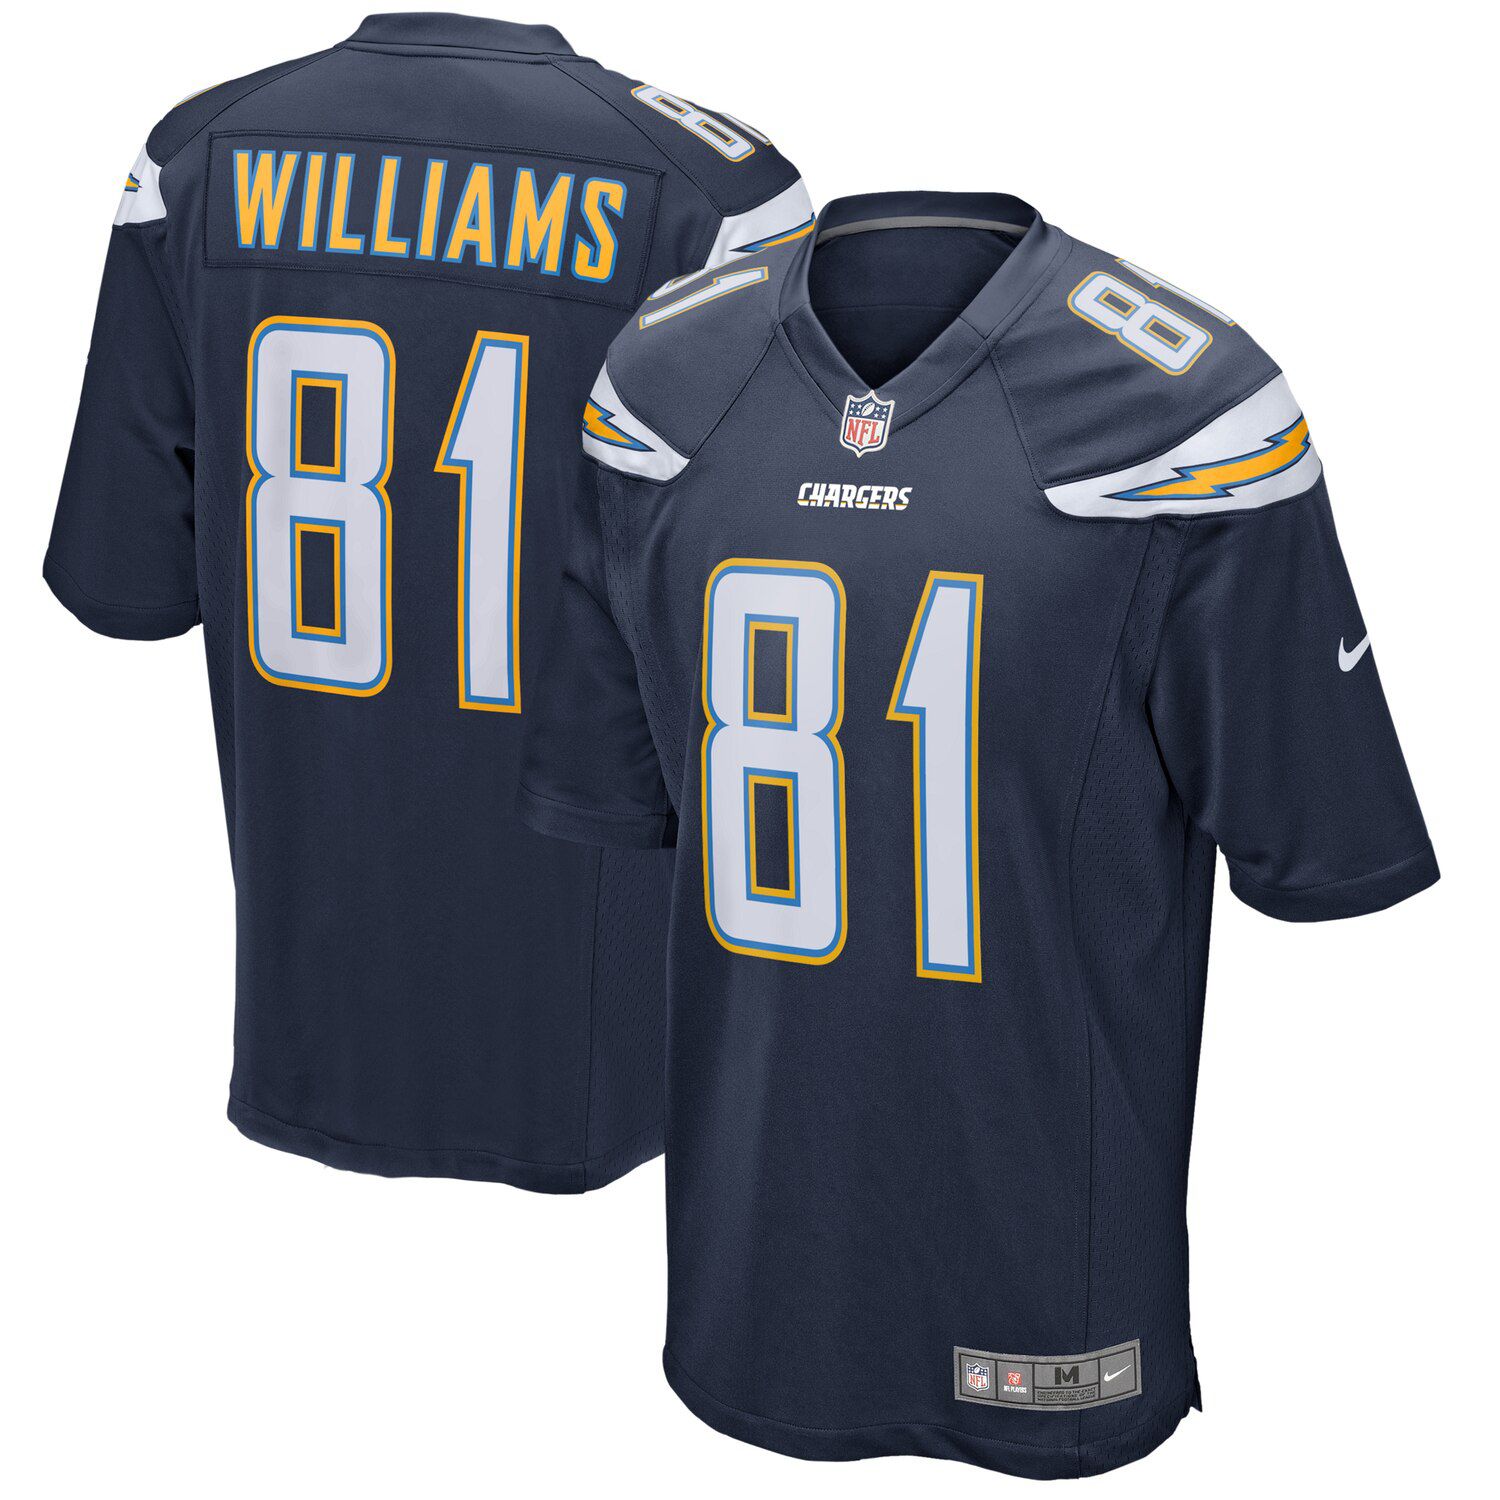 mike williams jersey number